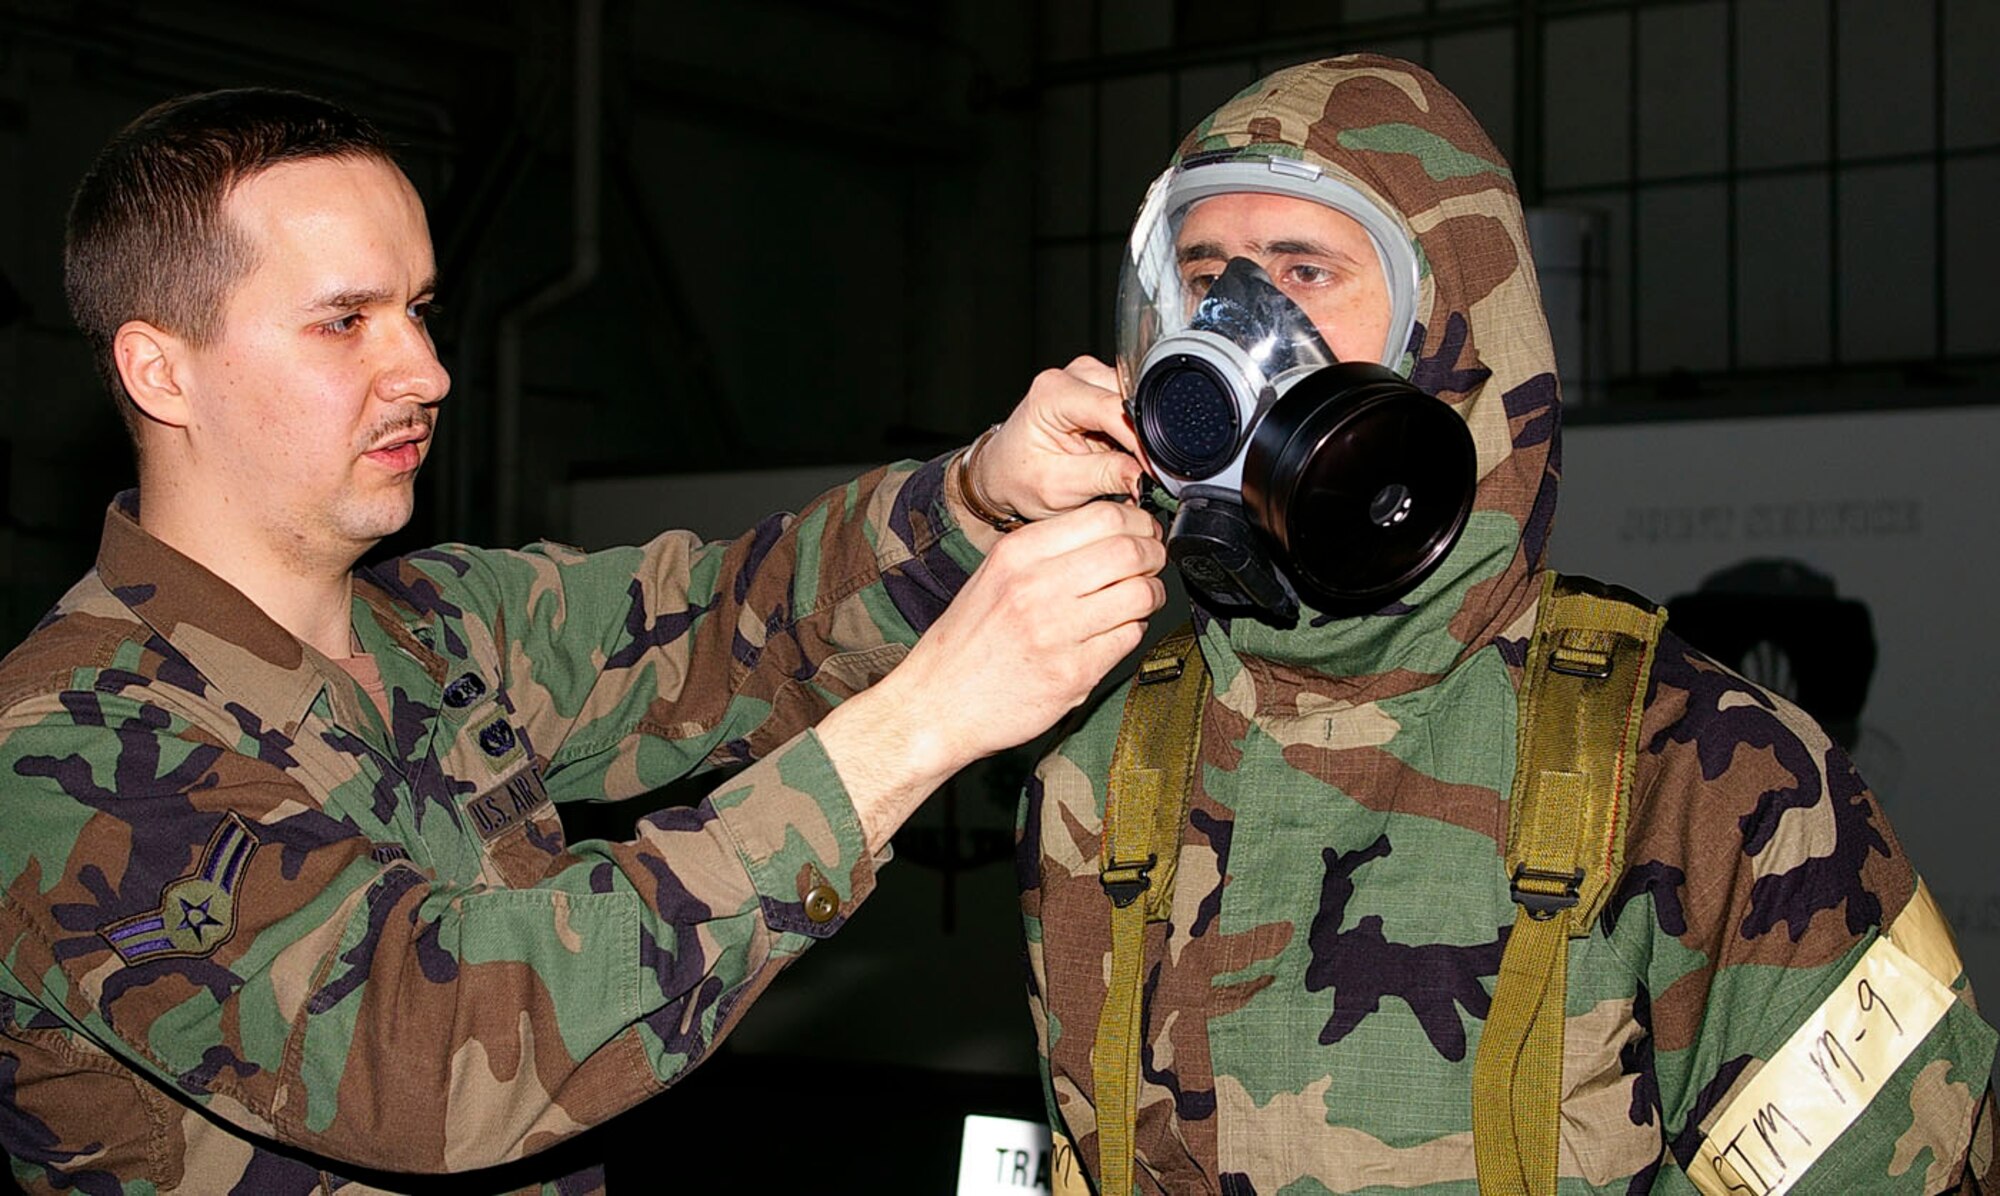 Airman 1st Class Christopher Sherfinski, left, 100th Civil Engineer Squadron Readiness and Emergency Management Flight and CBRN instructor, checks the mask of Senior Airman Christopher Greer, 100th Logistics Readiness Squadron, to make sure it fits properly. All military members are required to have CBRN before they deploy. (U.S. Air Force photo by Karen Abeyasekere)